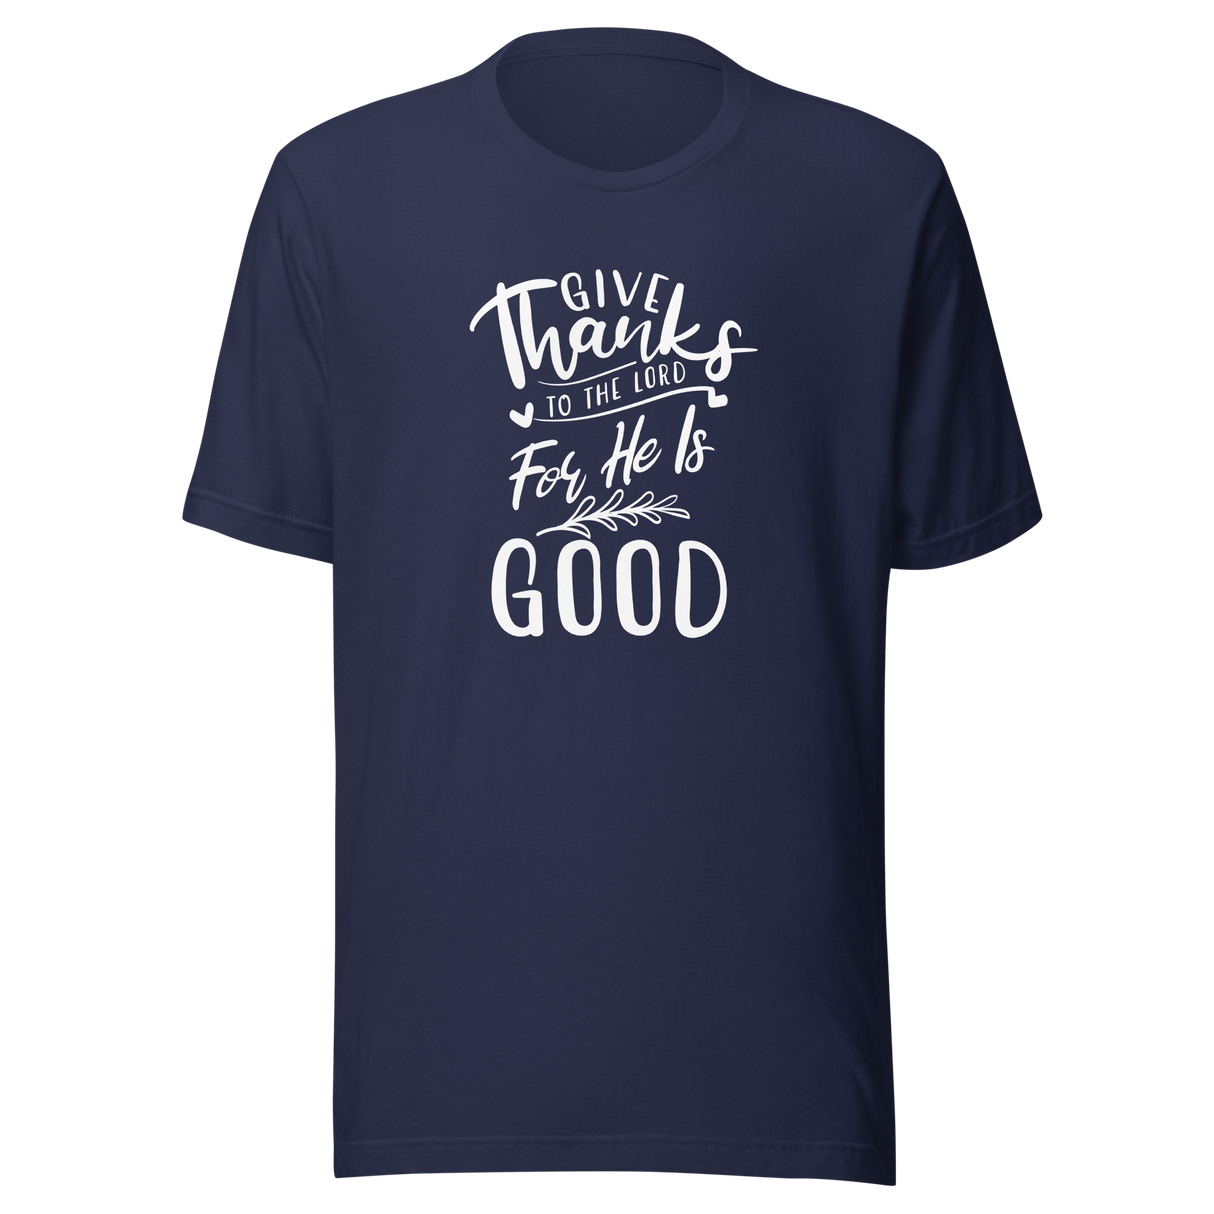 give-thanks-to-the-lord-for-he-is-good-christian-tee-bible-verse-t-shirt-thanksgiving-tee-faith-t-shirt-religion-tee#color_navy